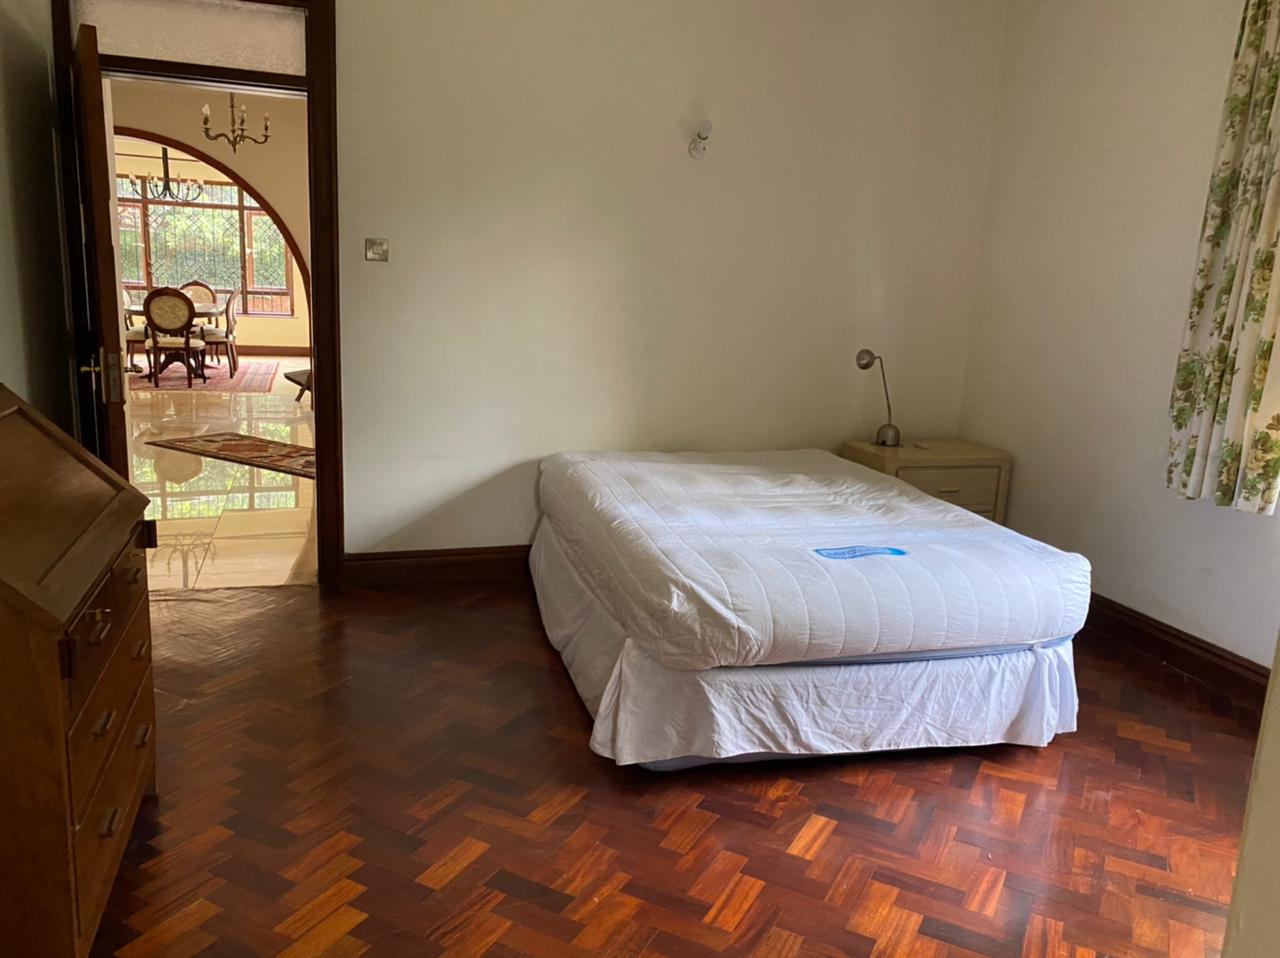 5 bedrooms Villa all bedrooms en-suite for rent at Ksh400k located in Kitisuru in a gated community but own compound sitting on half acre. With a spacious kitchen, dining area, study room10